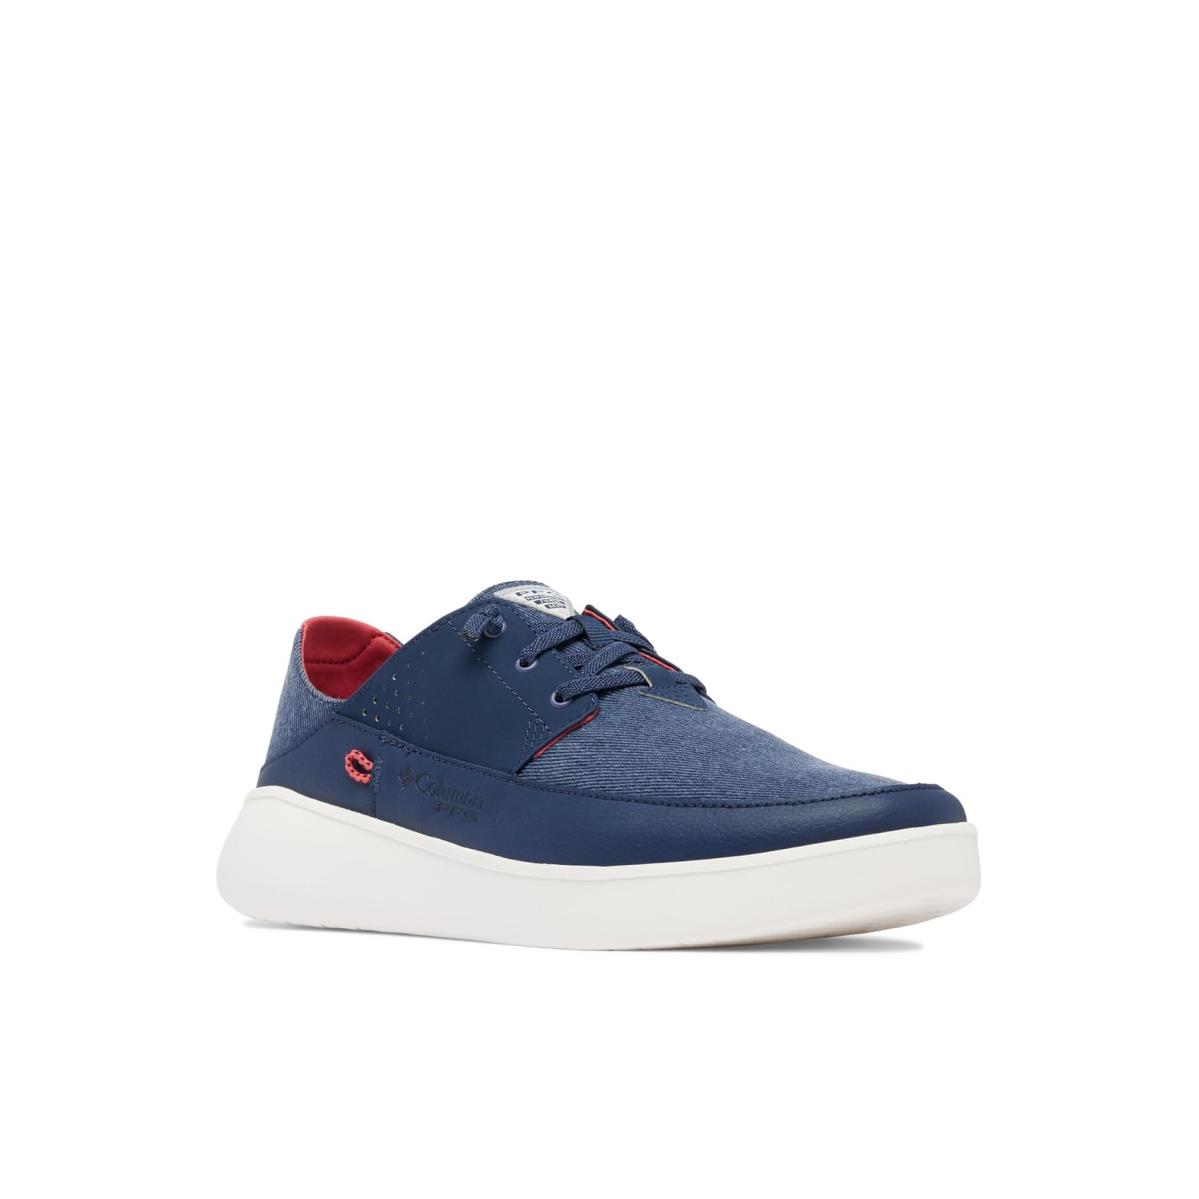 Man`s Boat Shoes Columbia Boatside Relaxed Pfg Collegiate Navy/Sunset Red